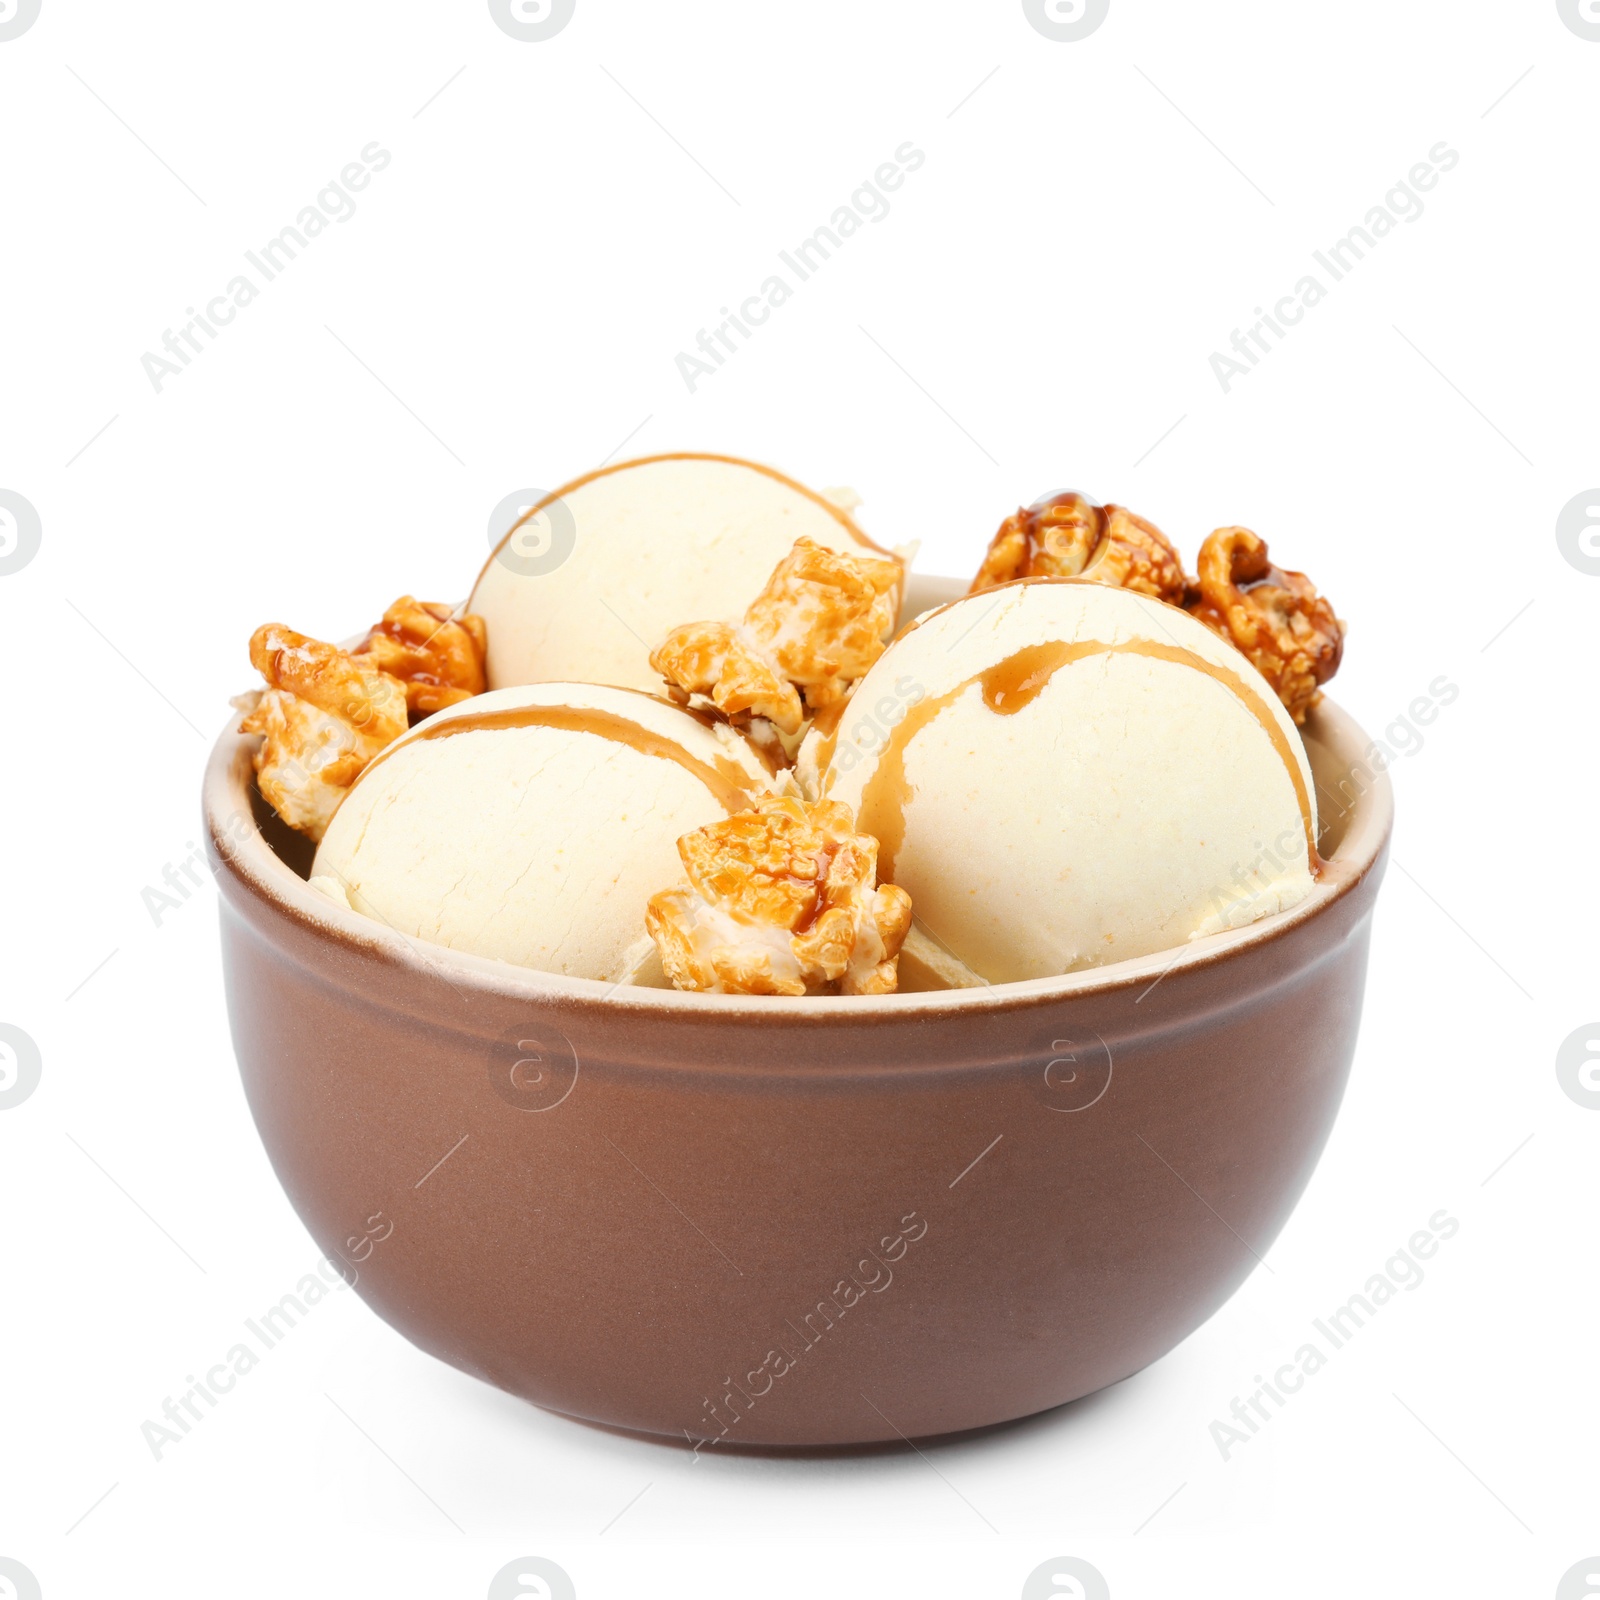 Photo of Delicious ice cream with caramel popcorn and sauce in bowl on white background